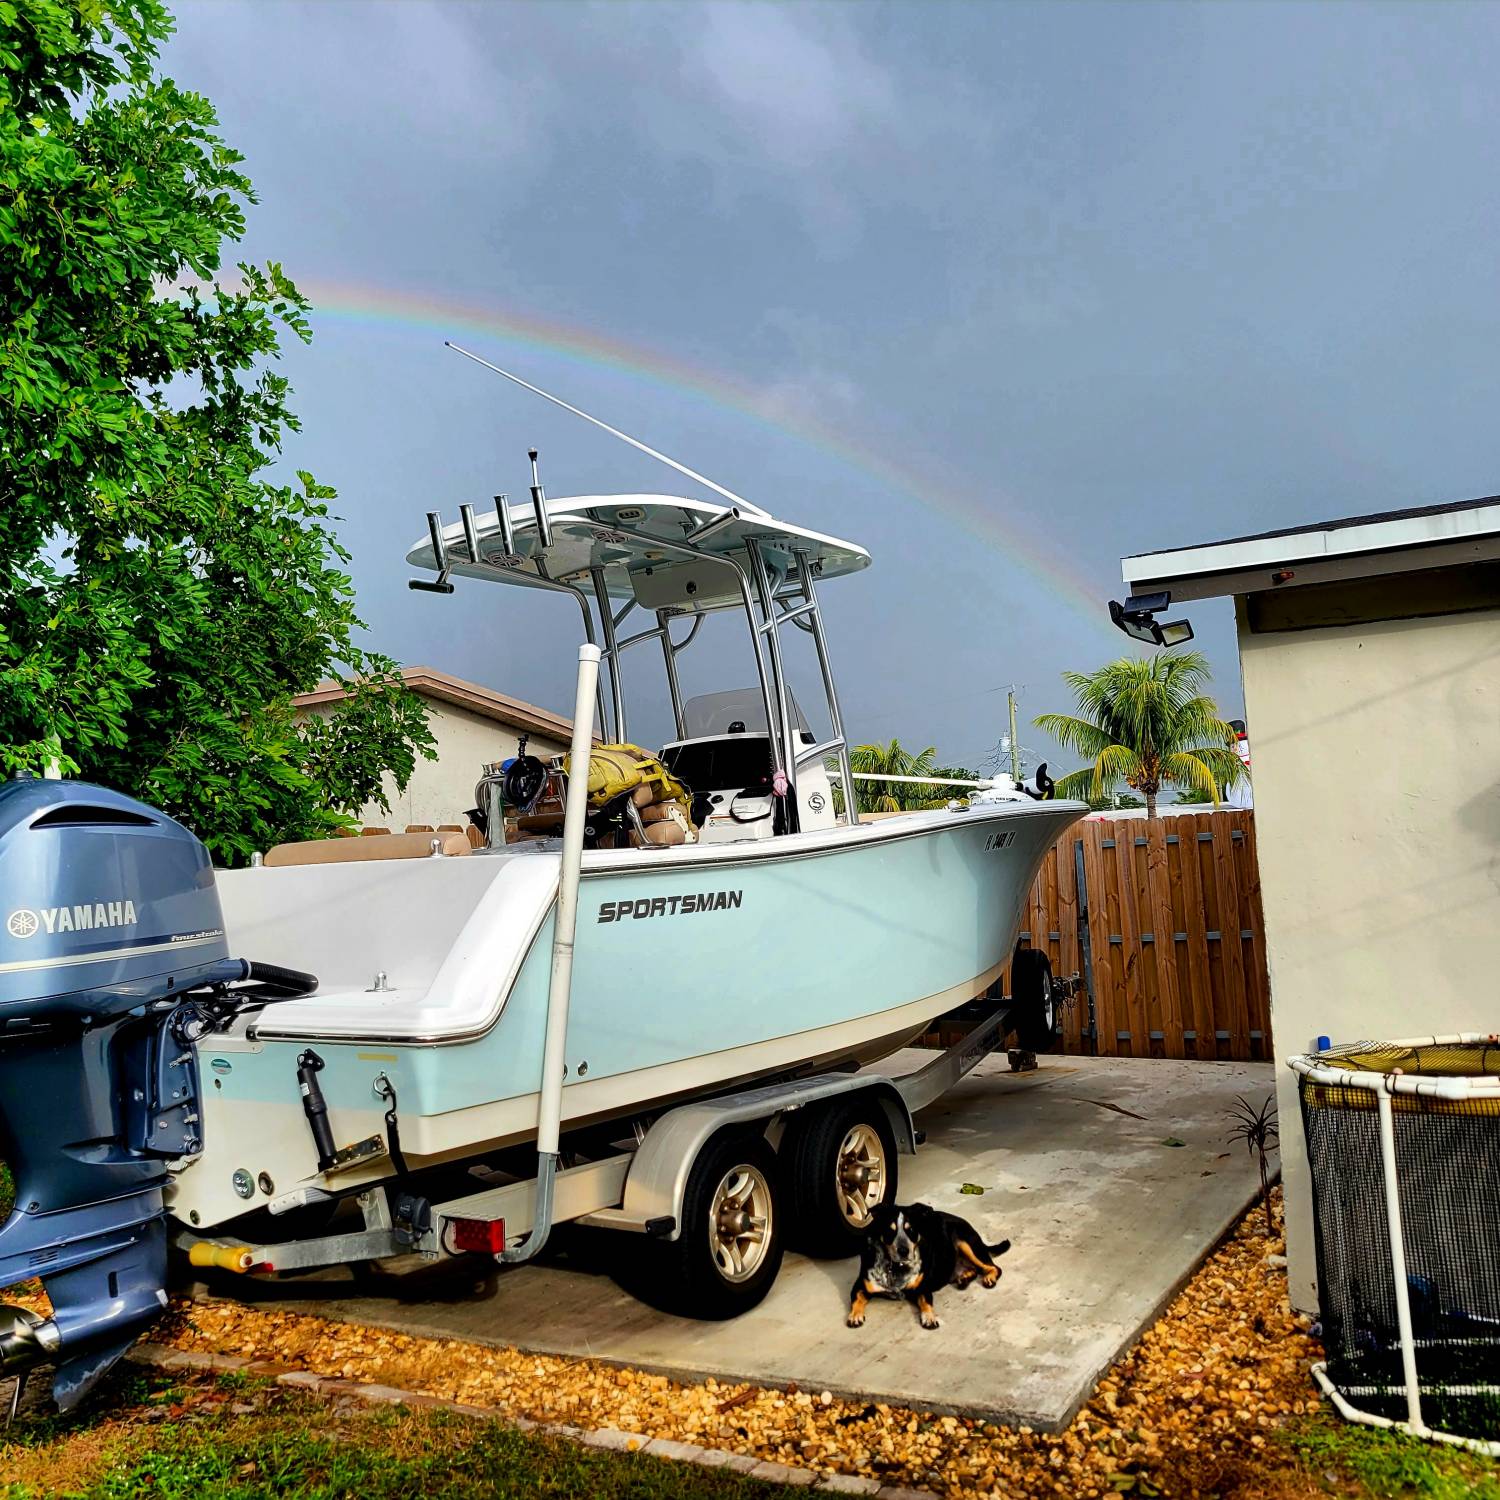 Title: Rainbow over Sportsman 232 Open - On board their Sportsman Open 232 Center Console - Location: Deerfield Beach, FL. Participating in the Photo Contest #SportsmanMay2023